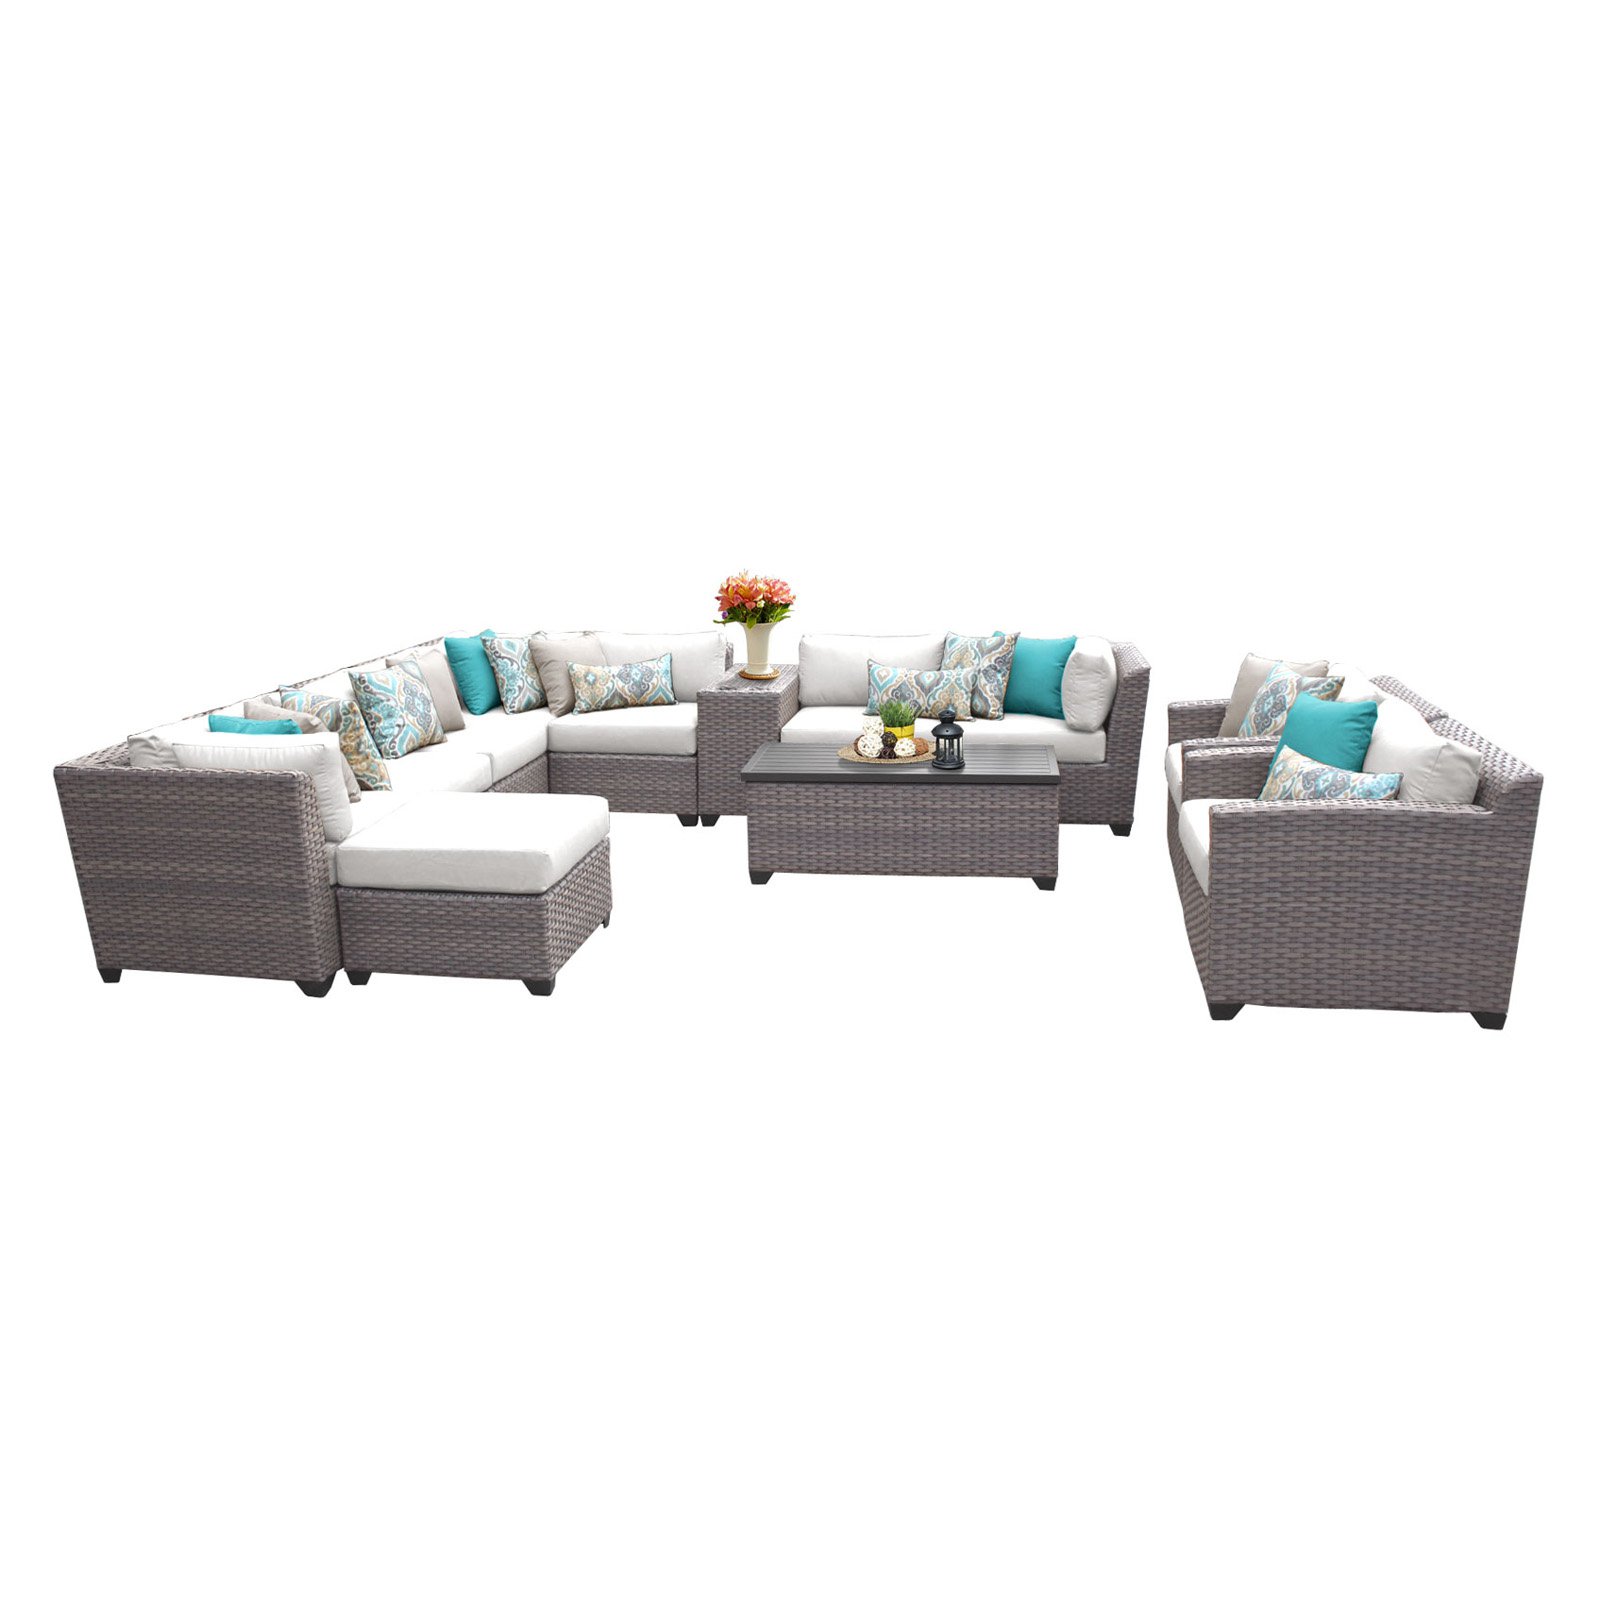 TK Classics Florence Wicker 12 Piece Patio Conversation Set with Coffee Table and 2 Sets of Cushion Covers - image 1 of 2